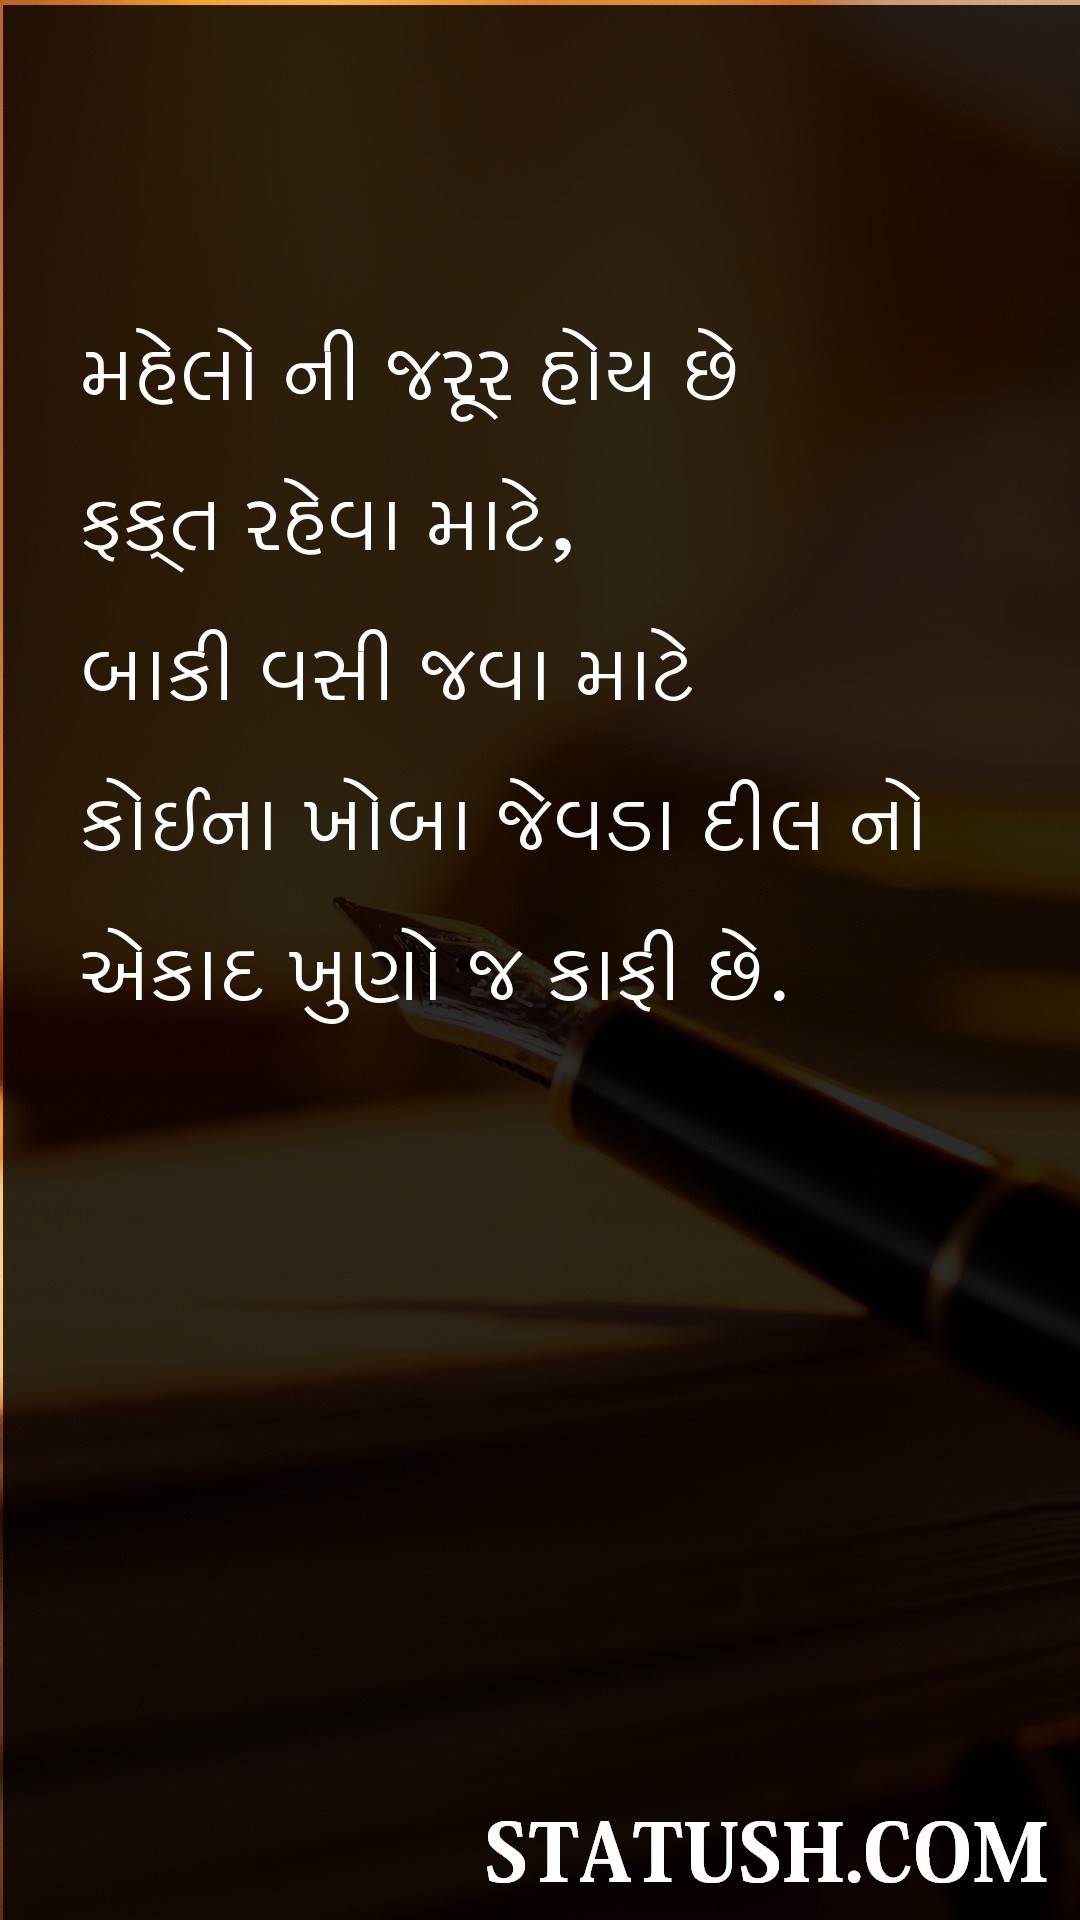 Palaces are needed - Gujarati Quotes at statush.com